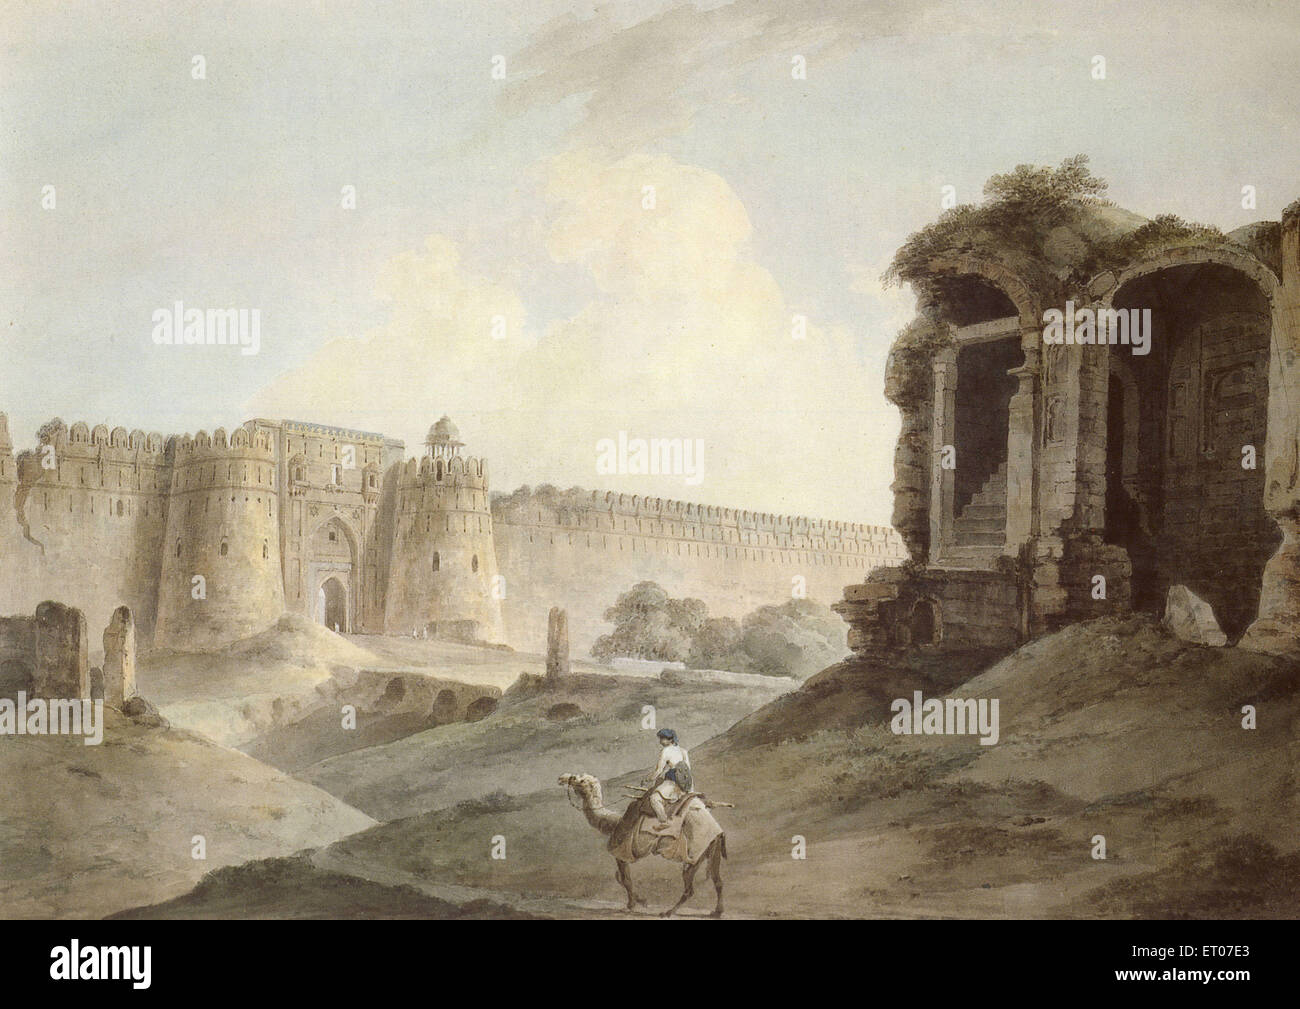 Purana Qila, Old Fort, Shergarh & Sher Fort, oldest fort in Delhi, camel rider, Delhi, India, Asia, old vintage 1800s picture Stock Photo